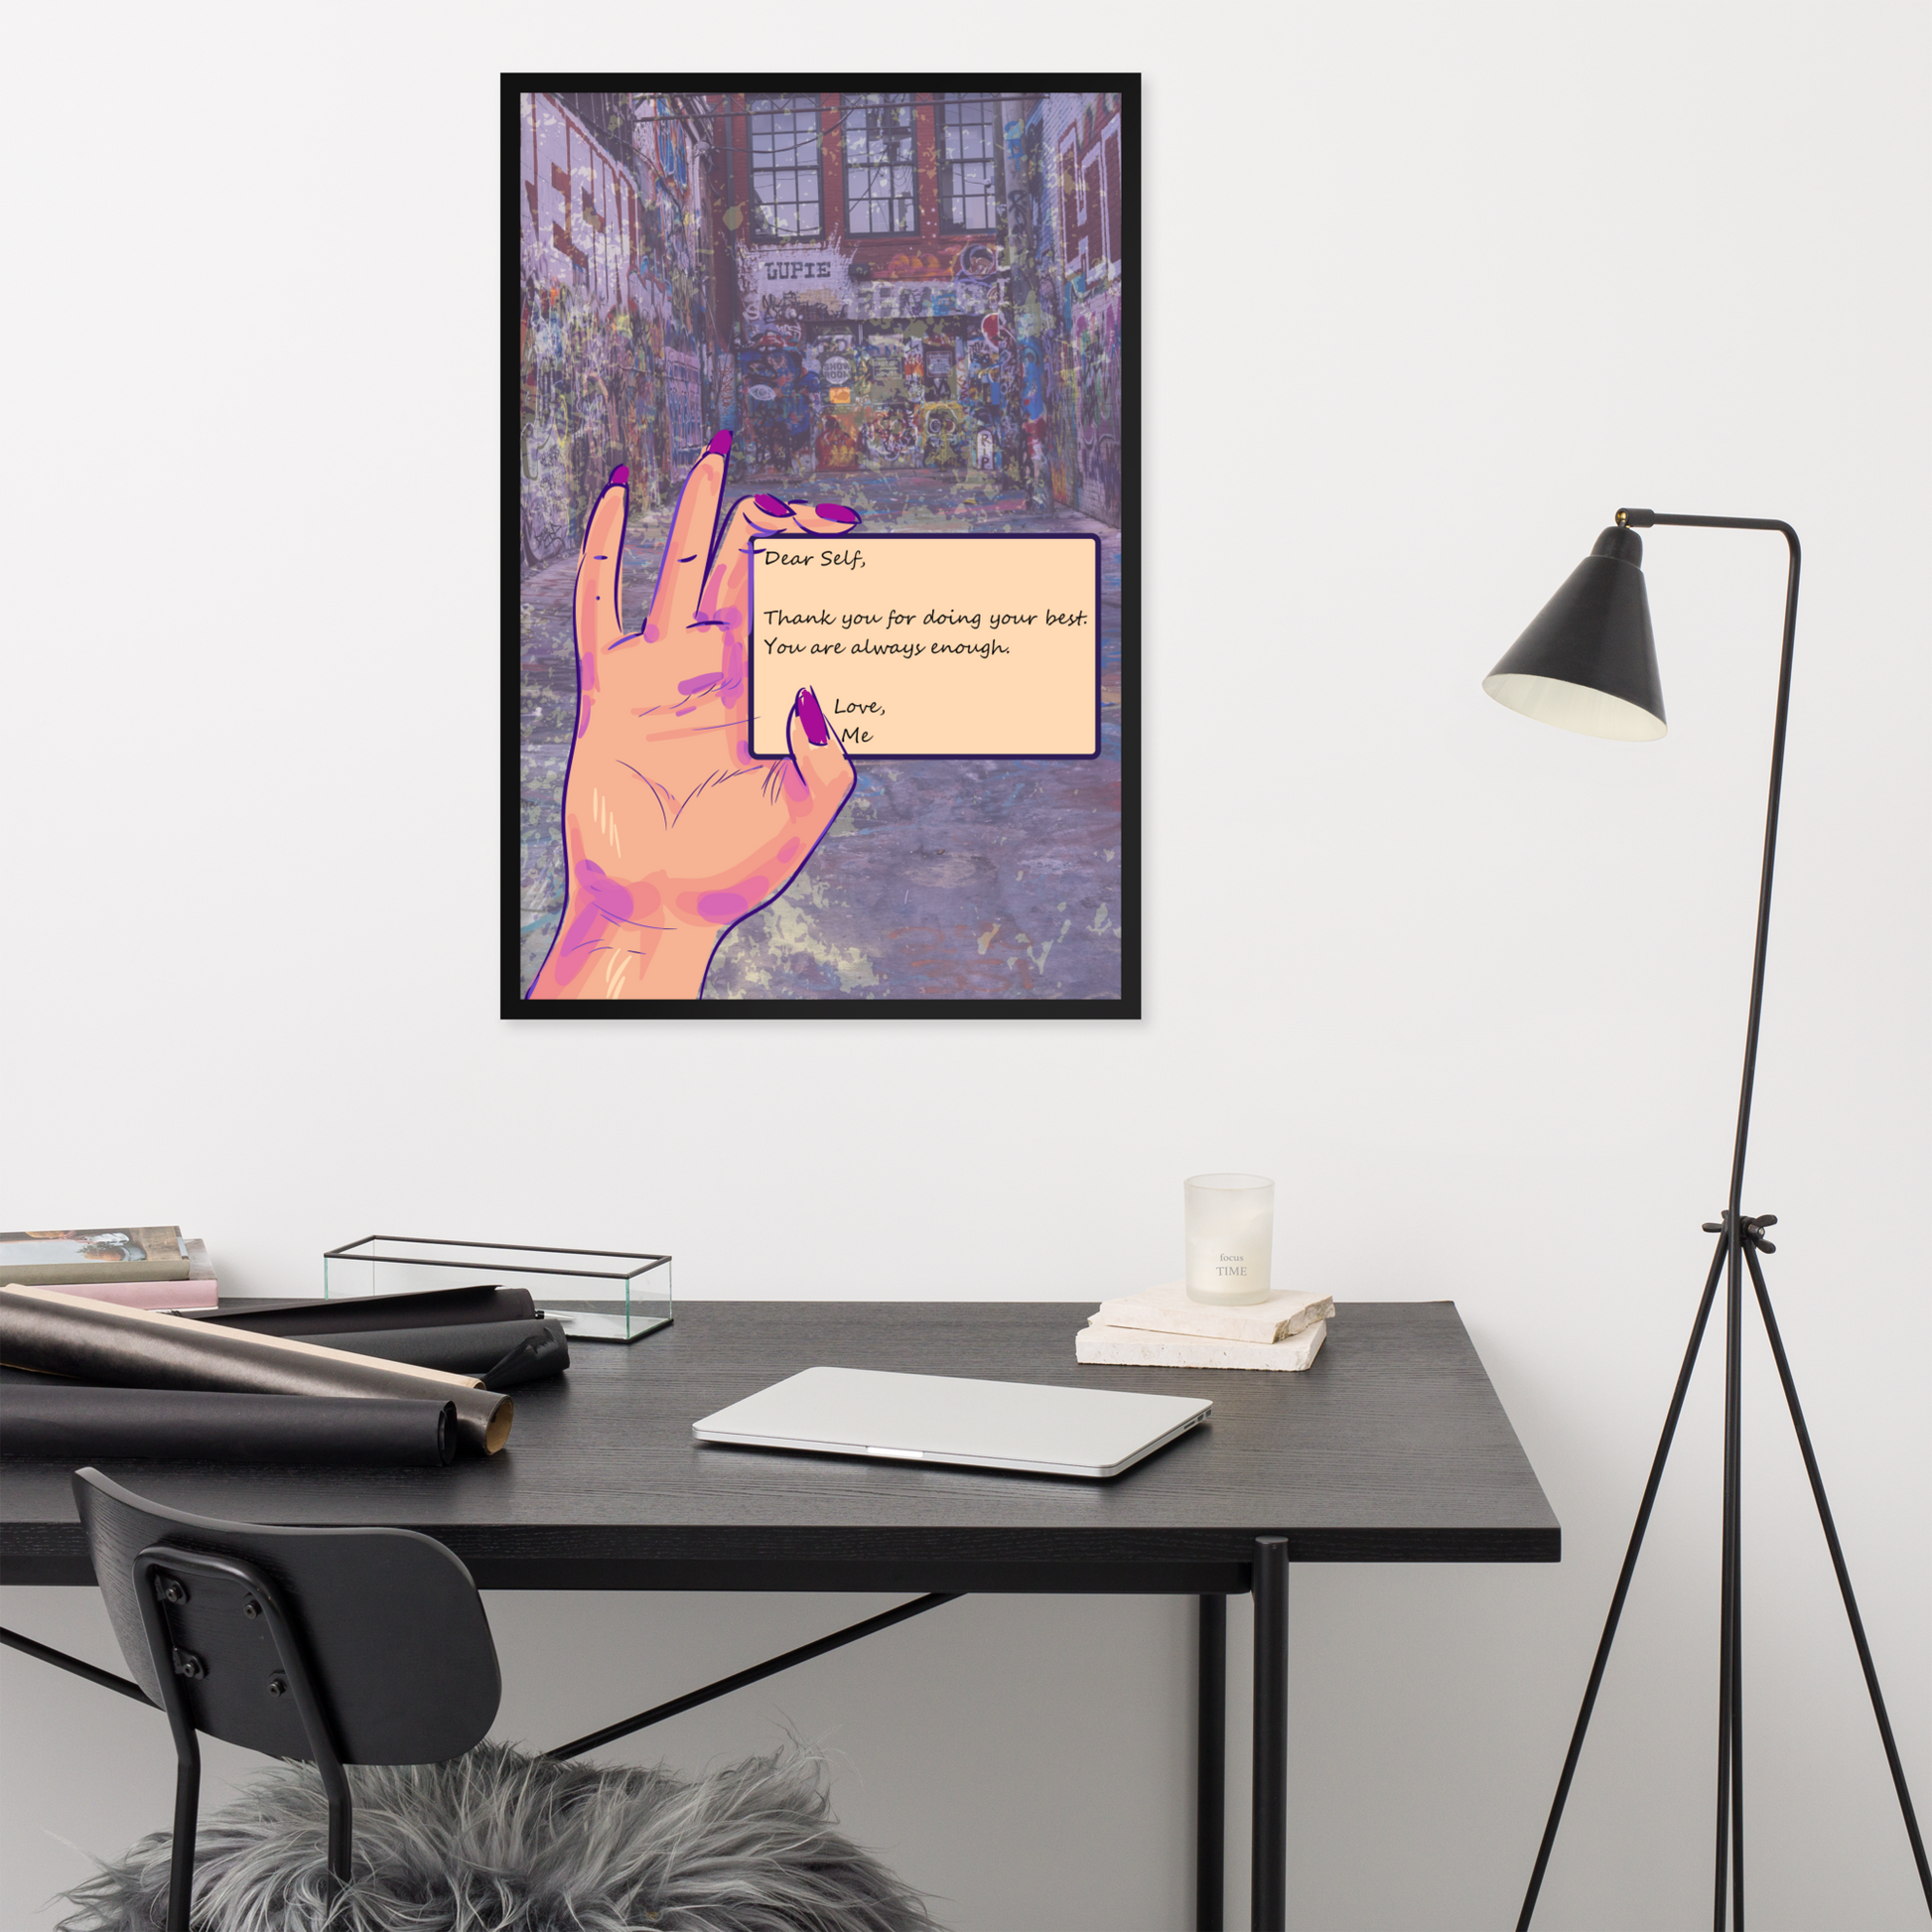 A framed art print of a hand with an Empowering 'Self Love Letter' mixed media graffiti art for self-love.